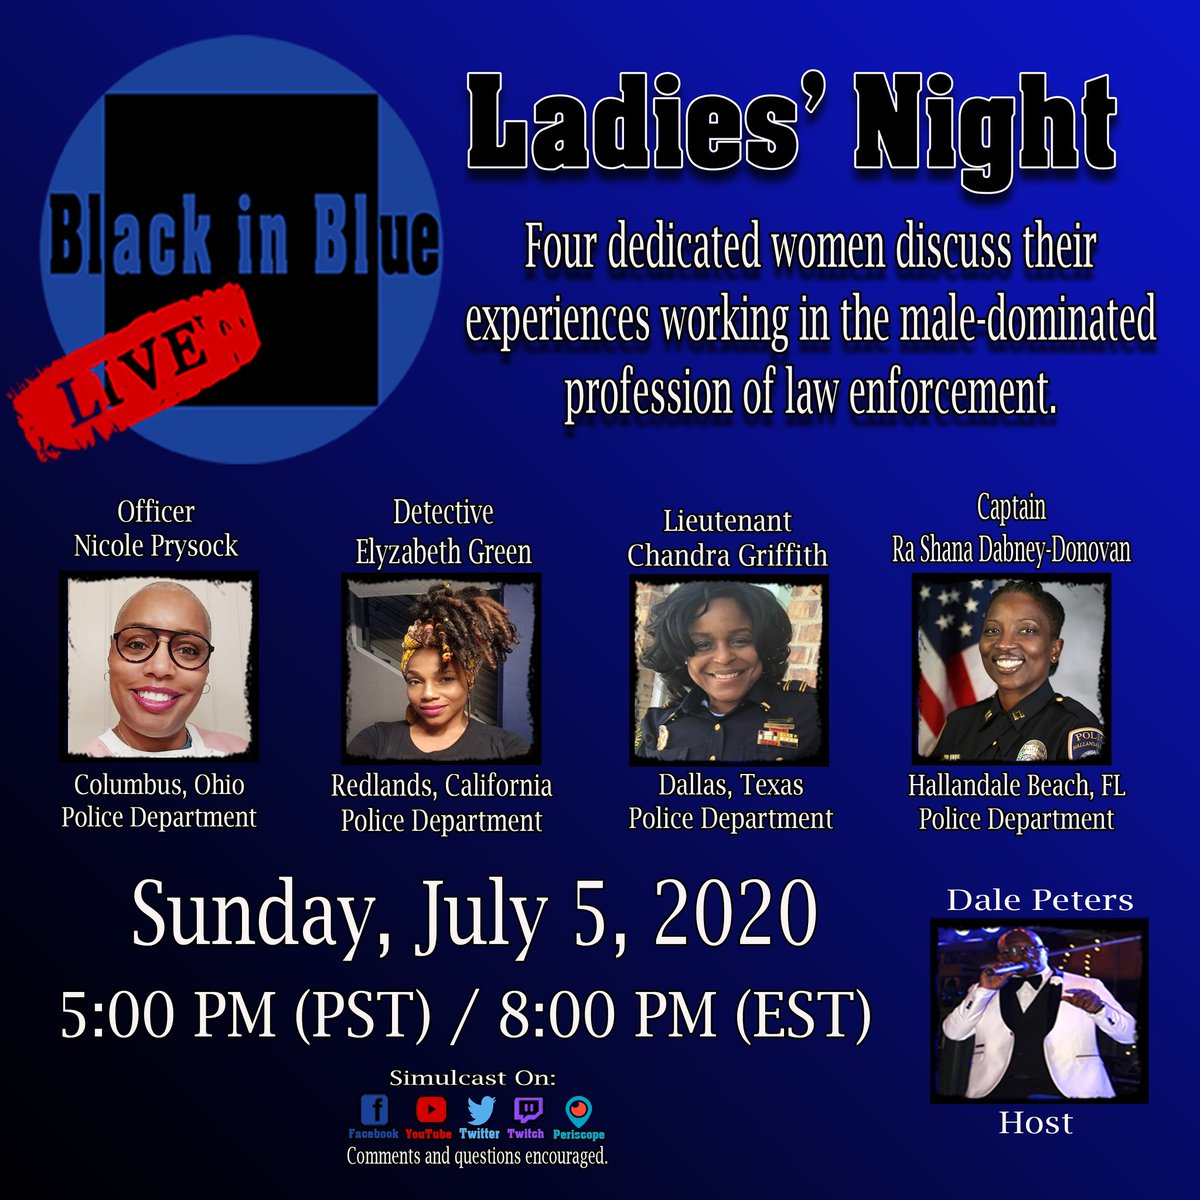 Be sure to check out Black in Blue Live this evening as I chat with 4 amazing women about their experiences working in law enforcement. Right here on Twitter. 5PM (PST) / 8PM (EST).
.
.
#Tonight #Live #Livestream #Broadcast #FemaleOfficers #WonderWomen